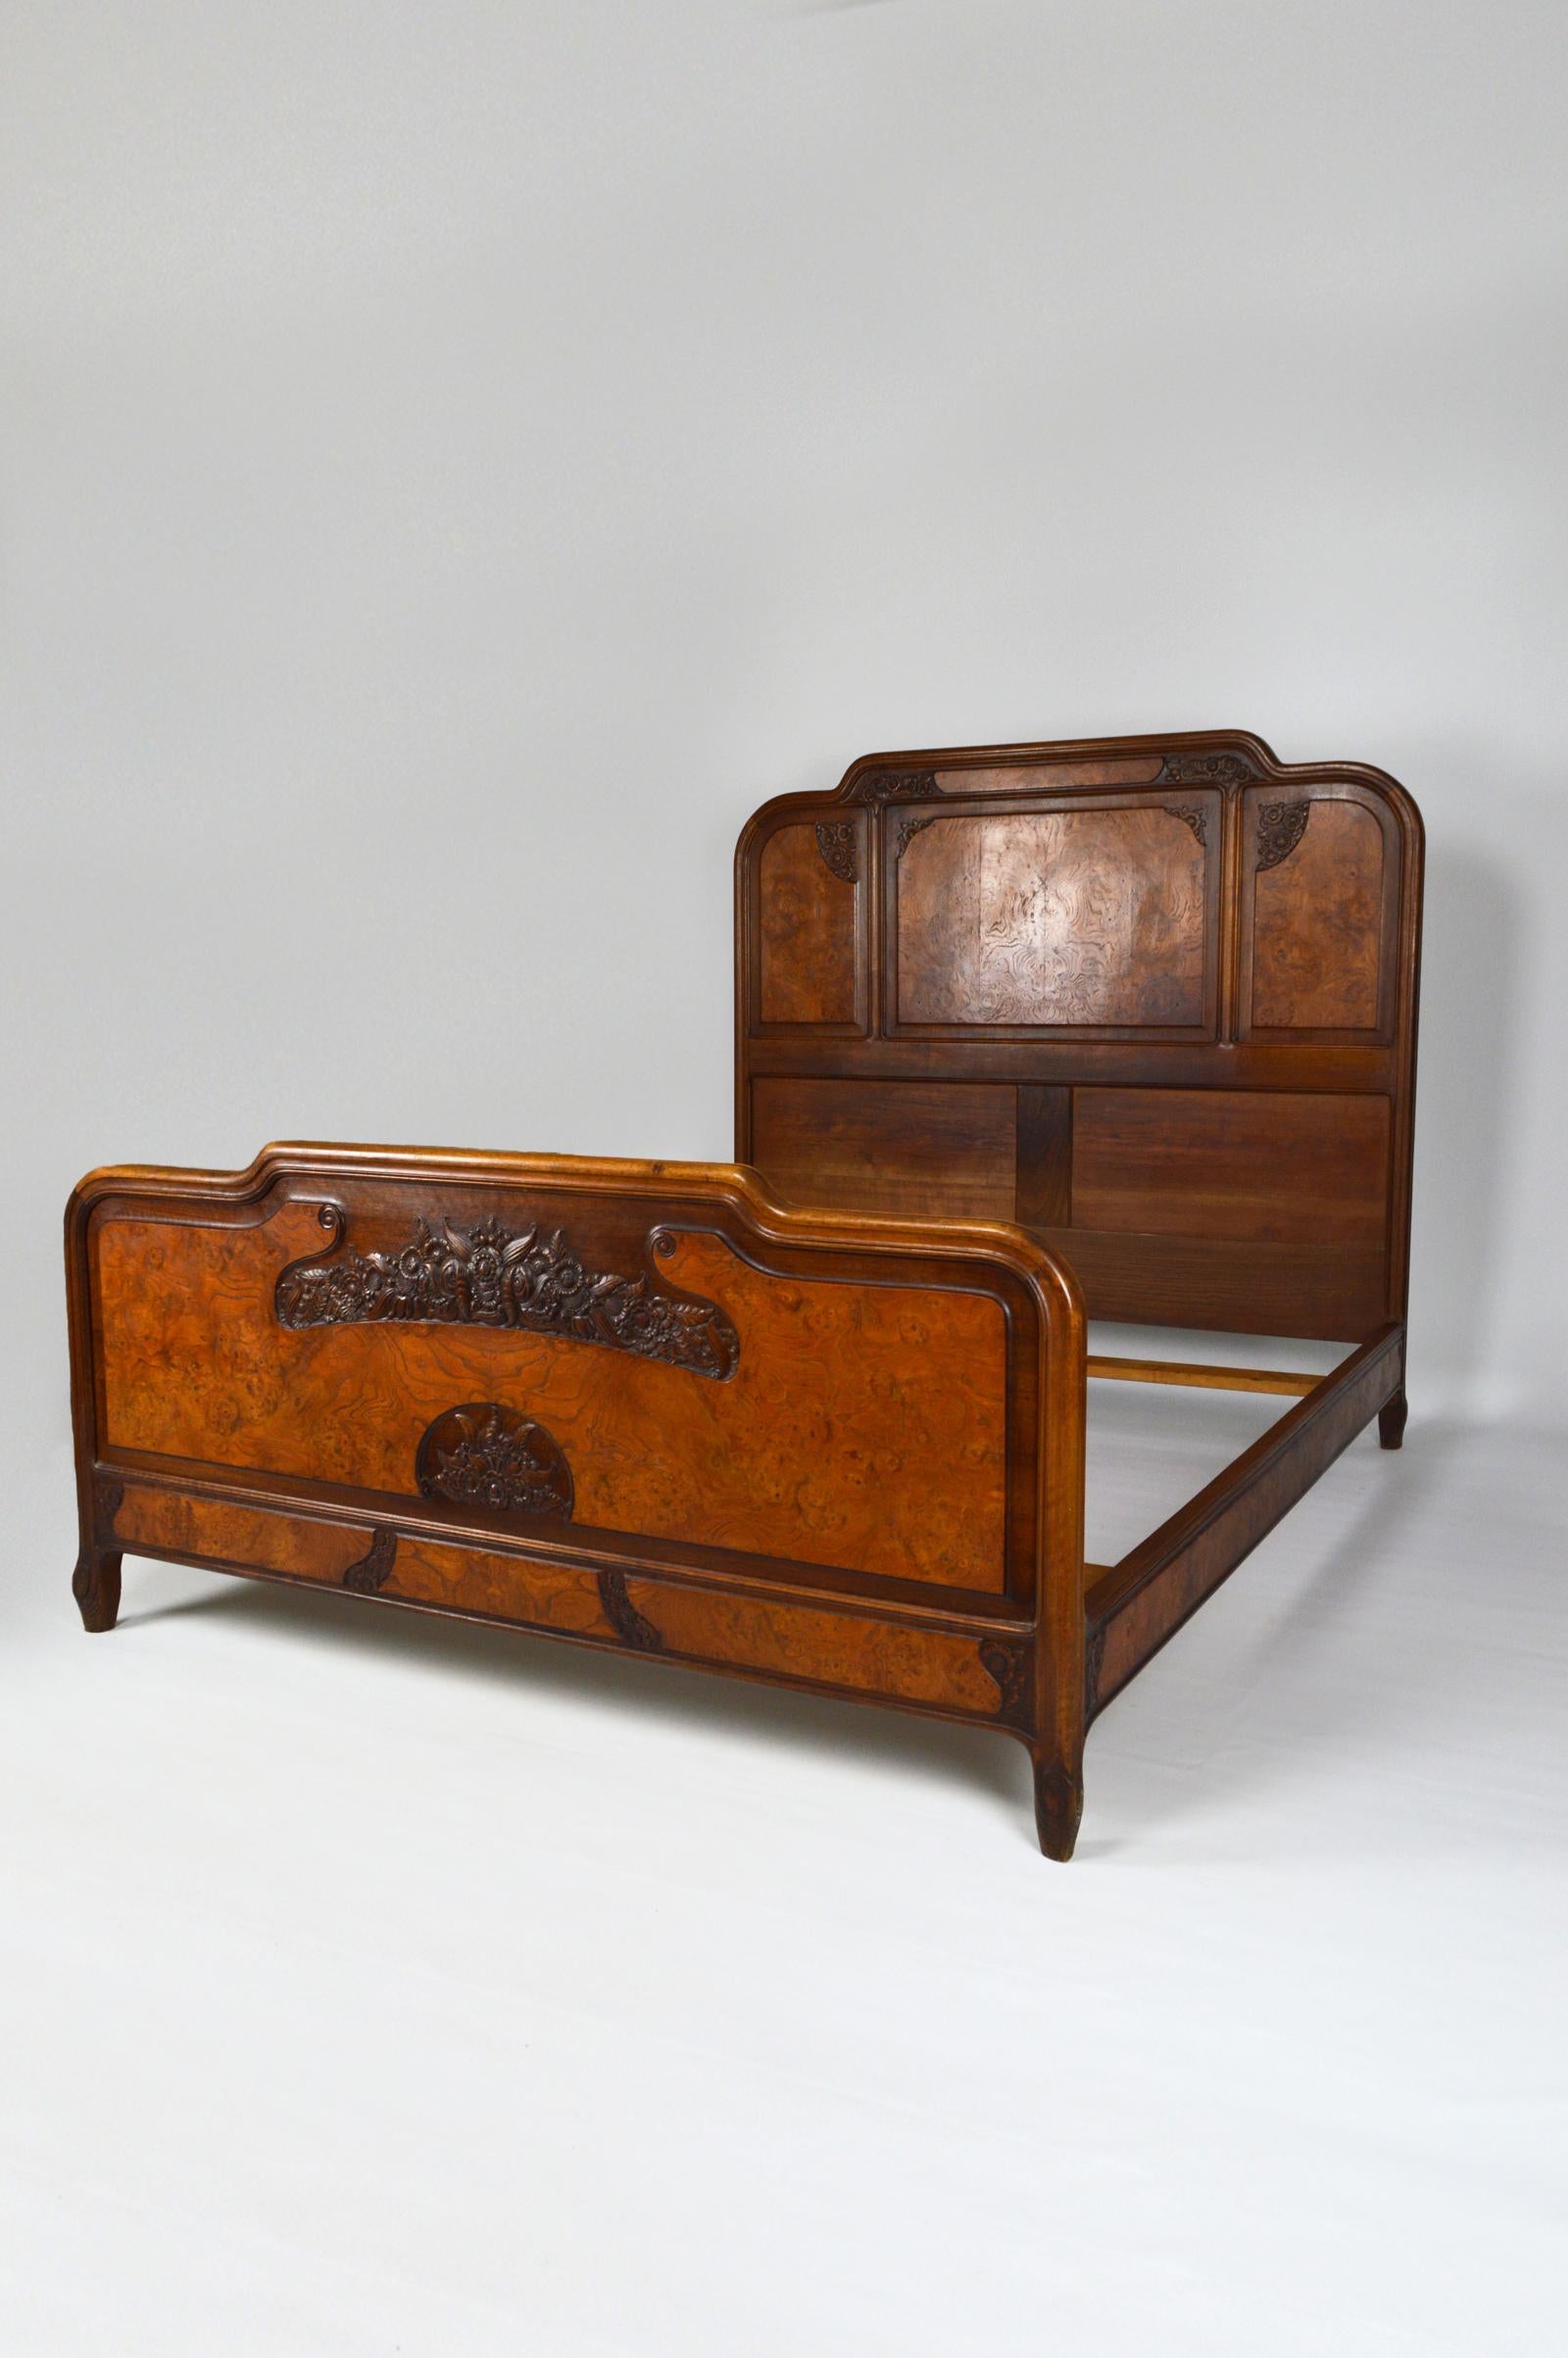 Floral Art Nouveau Bedroom Set of 5 in Carved Walnut, France, circa 1910 In Good Condition For Sale In L'Etang, FR